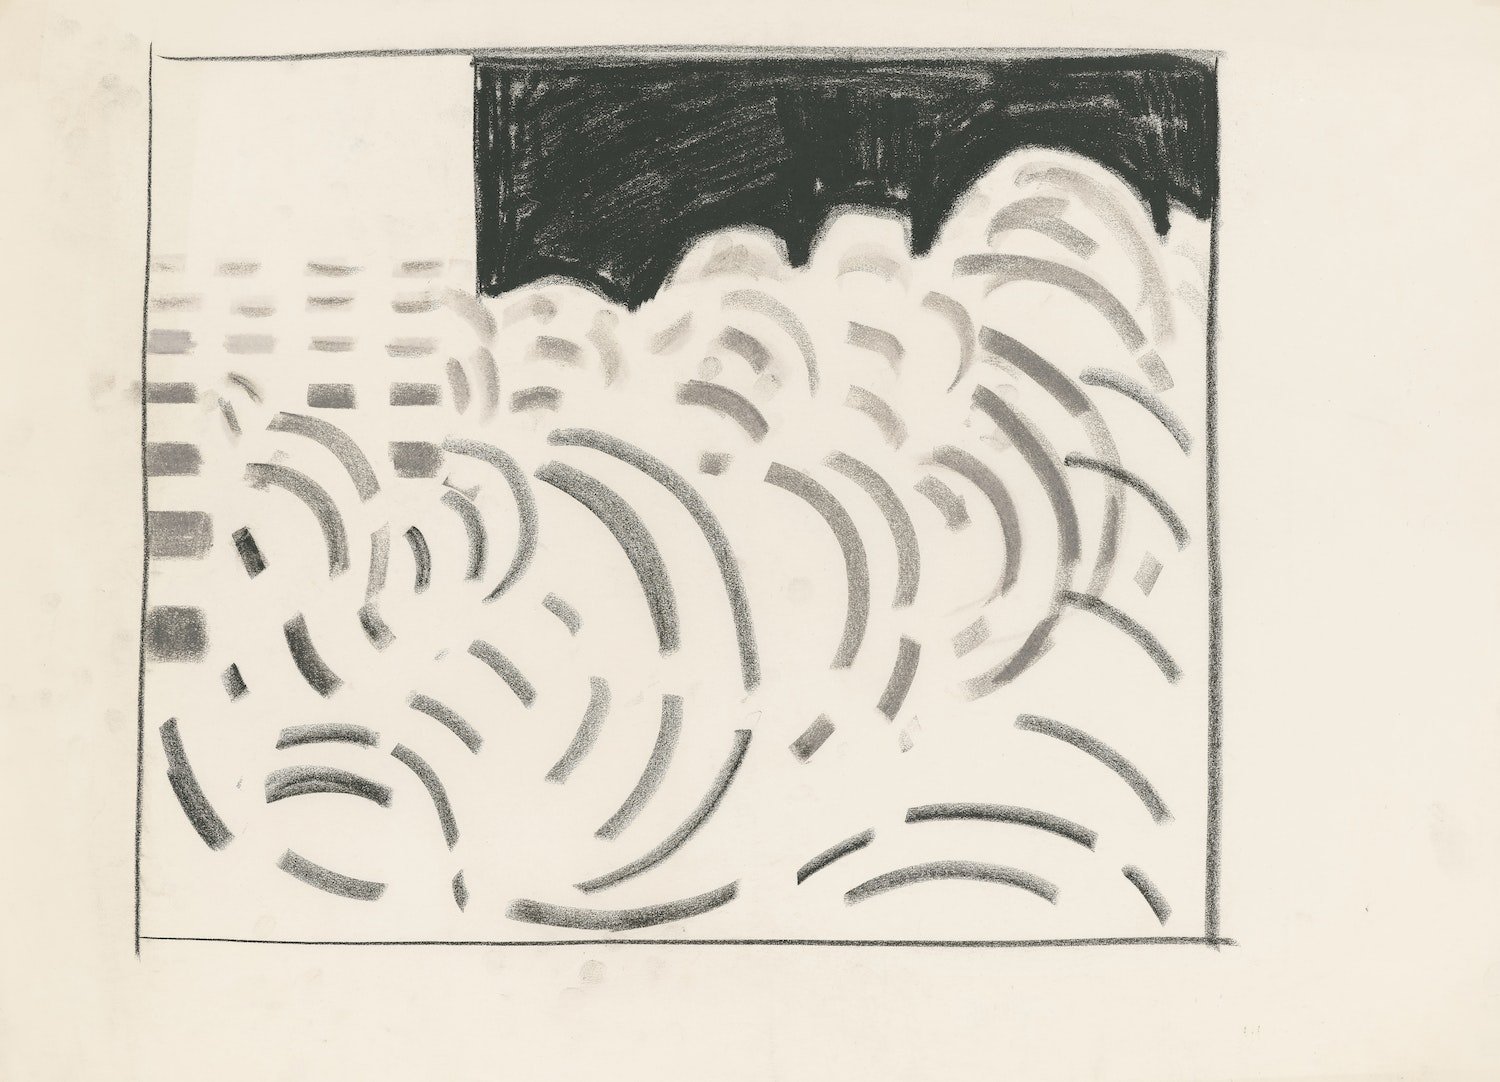 Bridget Riley Recollections of Scotland (2), 1959 conte crayon on paper - contemporary drawing, drawings, work on paper, art on paper, contemporary art